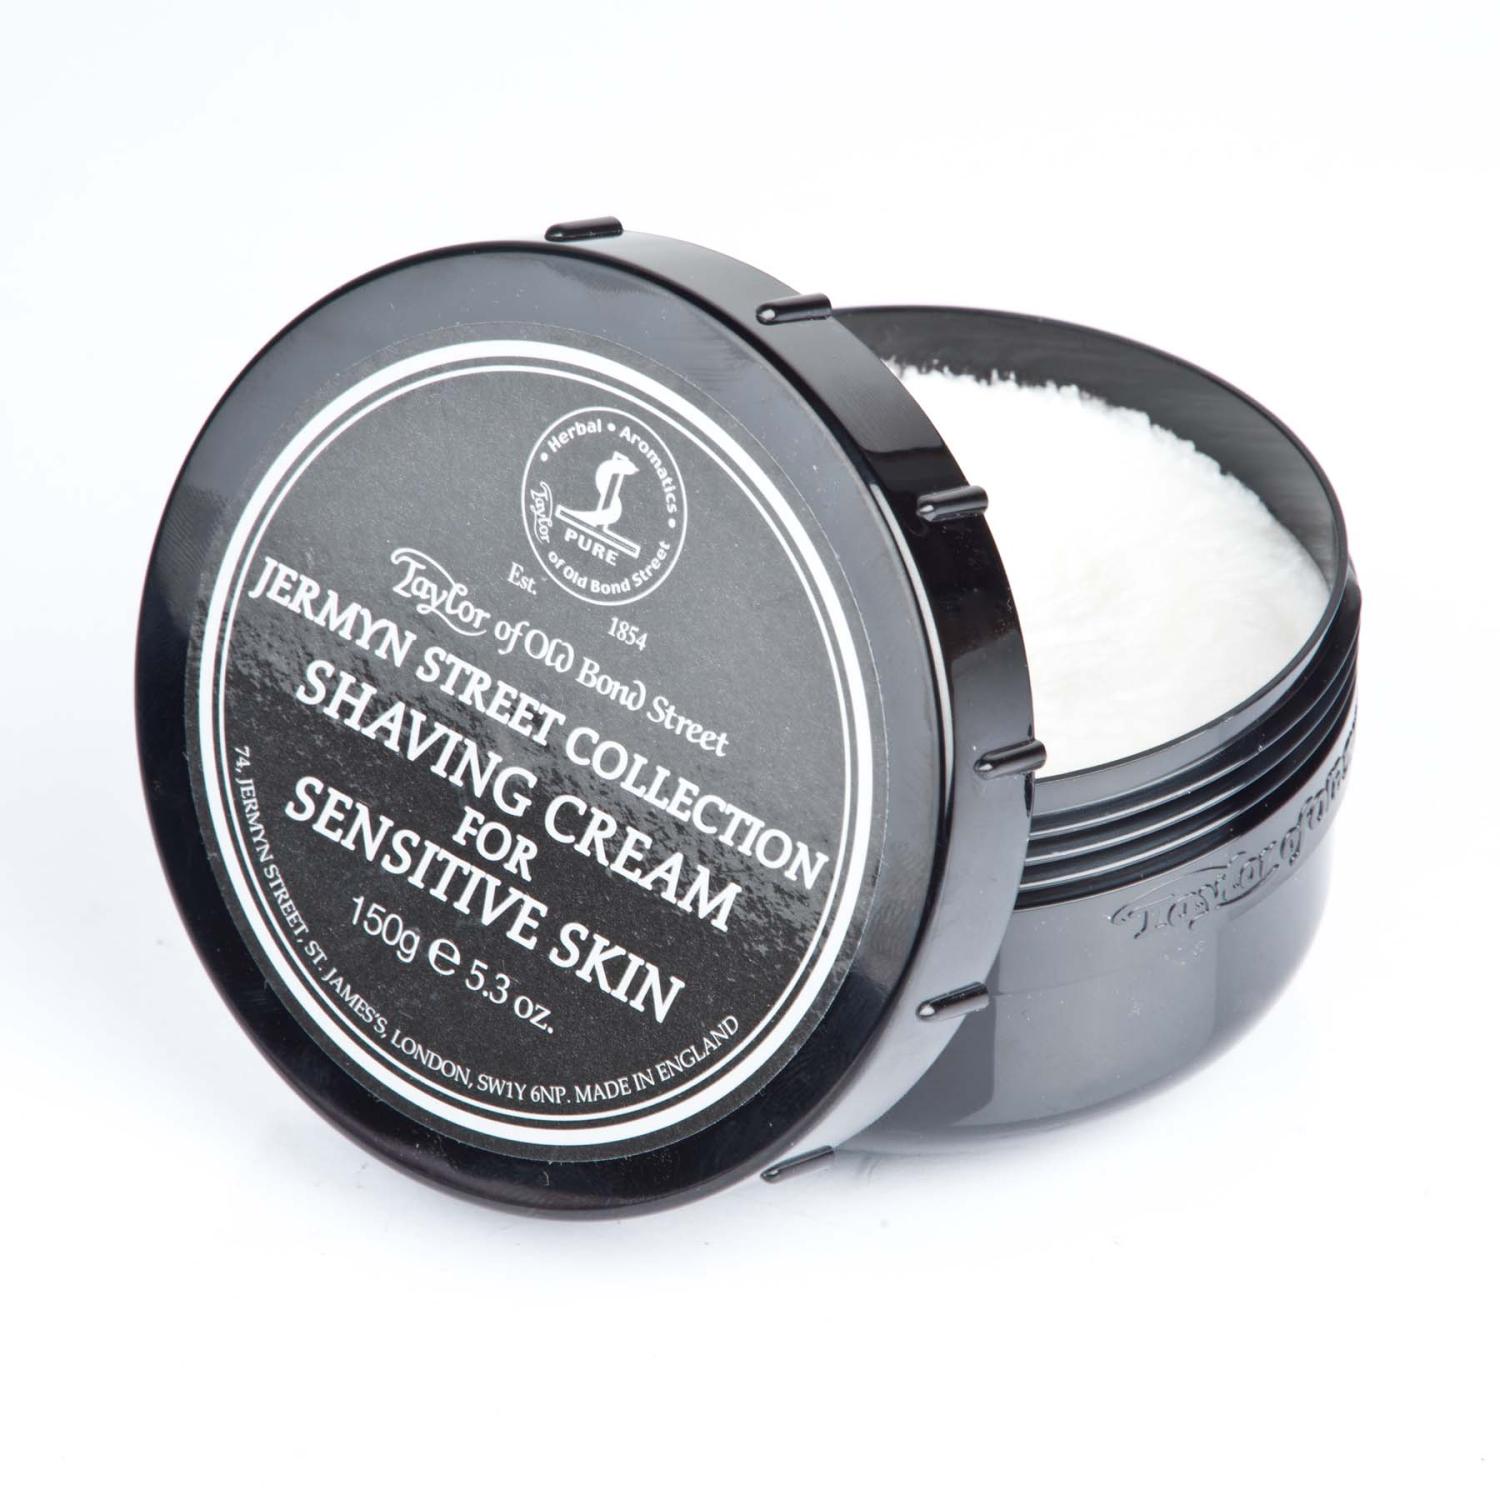 Taylor James St Collection Shaving luxury Cream